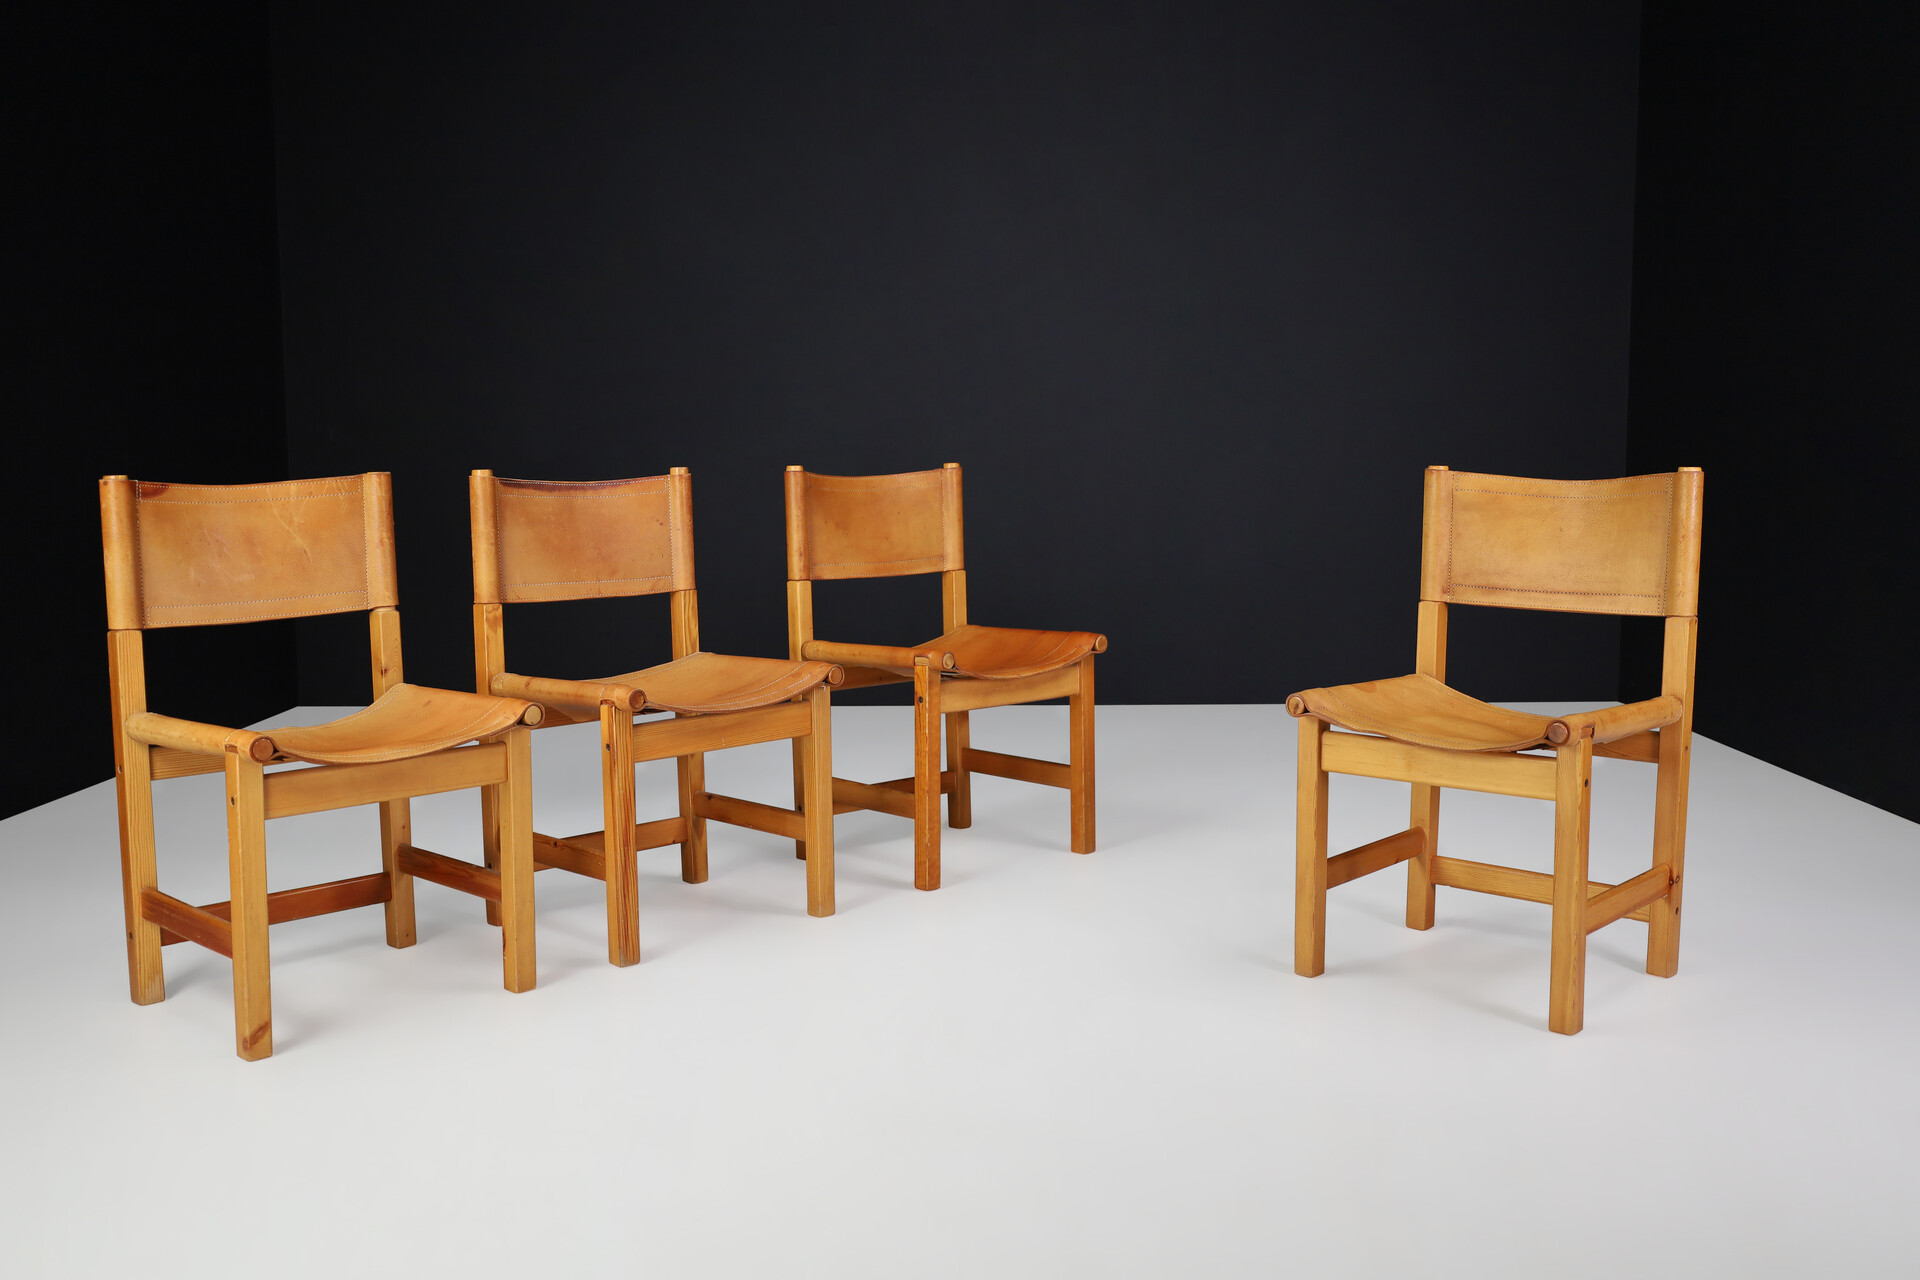 Scandinavian modern Dining Chairs in Pine and patinated cognac saddle Leather, Sweden 1970s Late-20th century